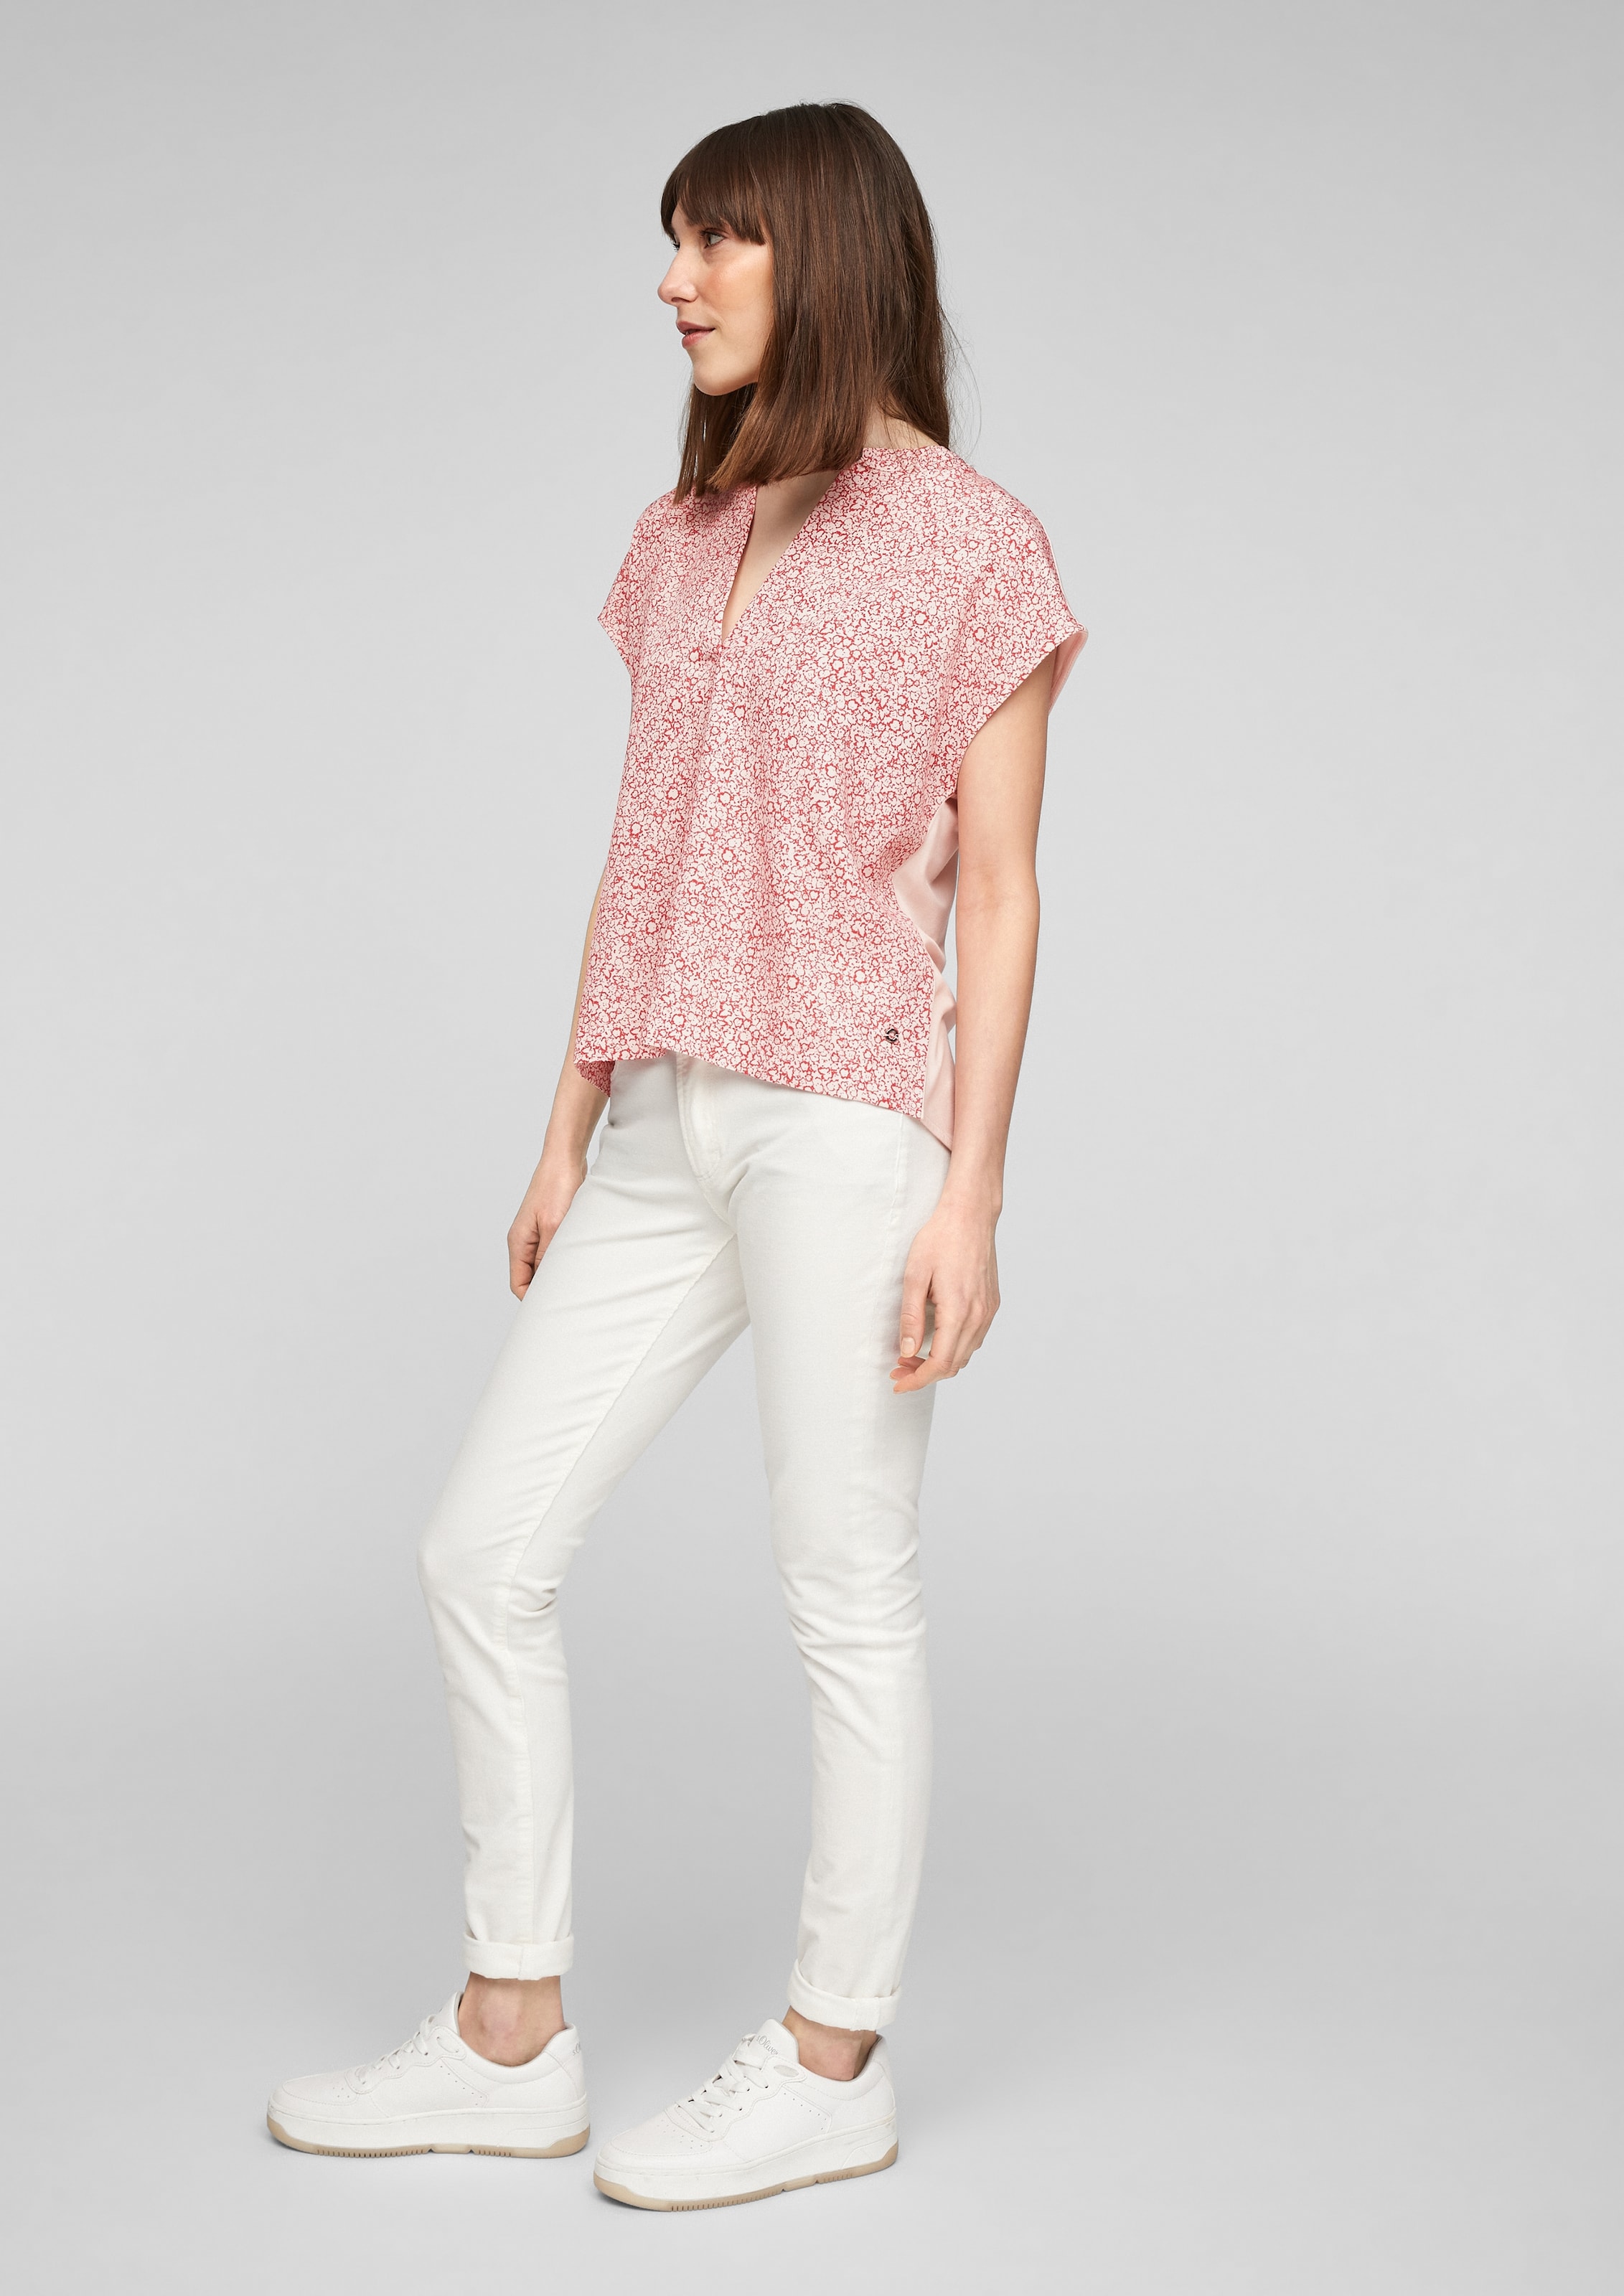 Frauen Shirts & Tops s.Oliver Shirt in Blutrot - PW17930